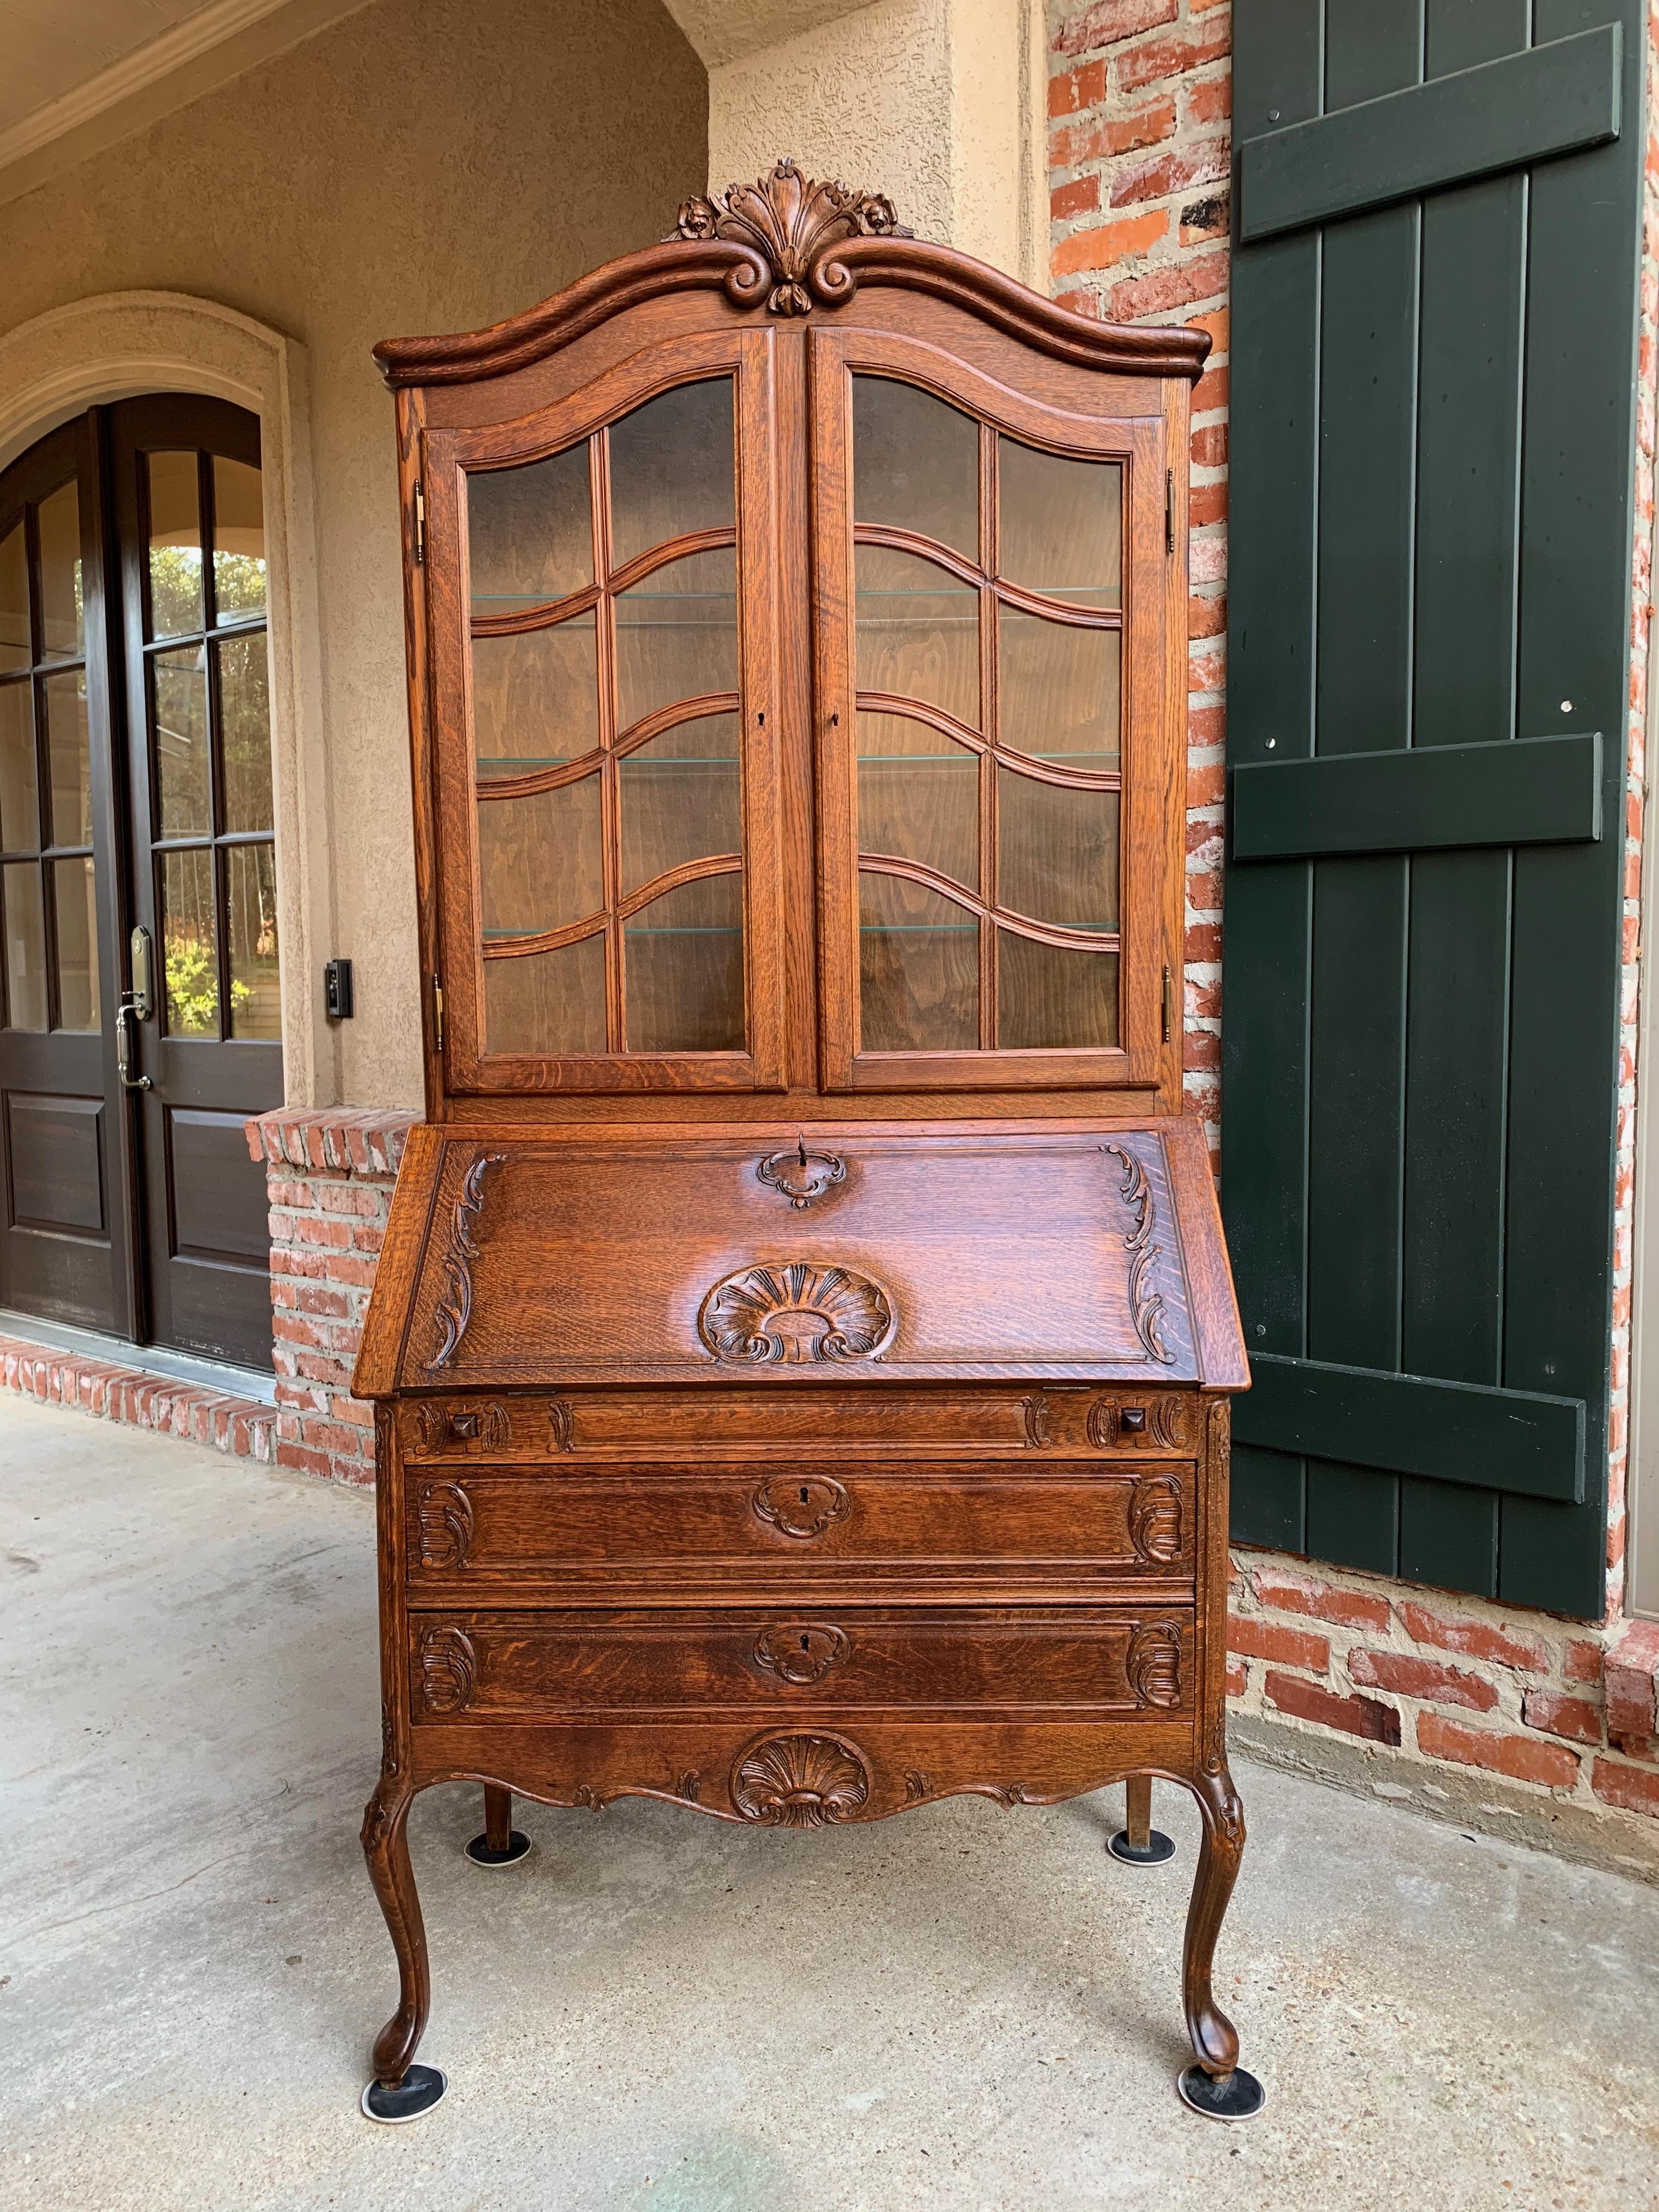 Direct from France, a lovely vintage French carved “drop front” secretary, absolutely loaded with carvings and details!~
~Quintessential French style from the large upper carved shell crown all the way to the lower serpentine base with carved shell